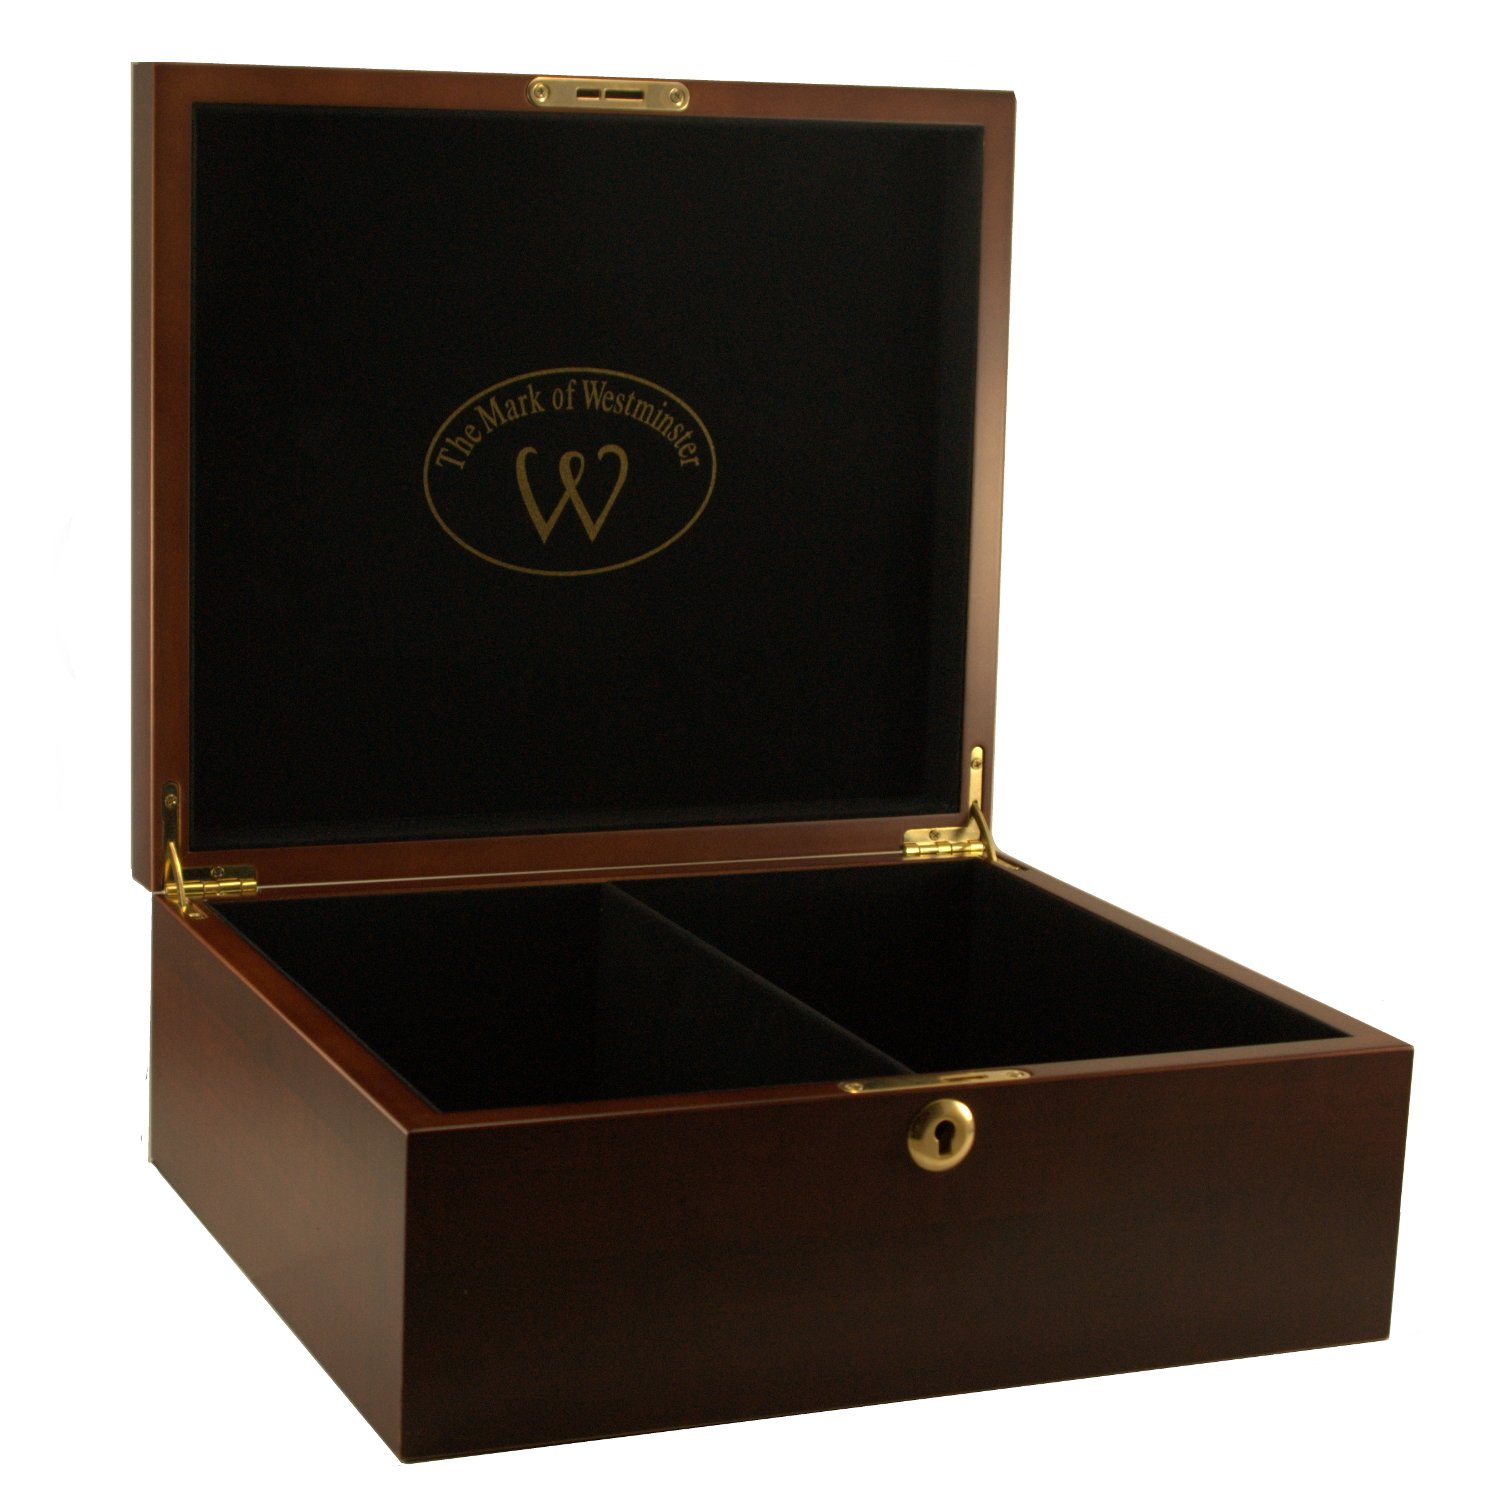 Large Cherry Humidor Style Chess Box (Add 100.00) OUT OF STOCK